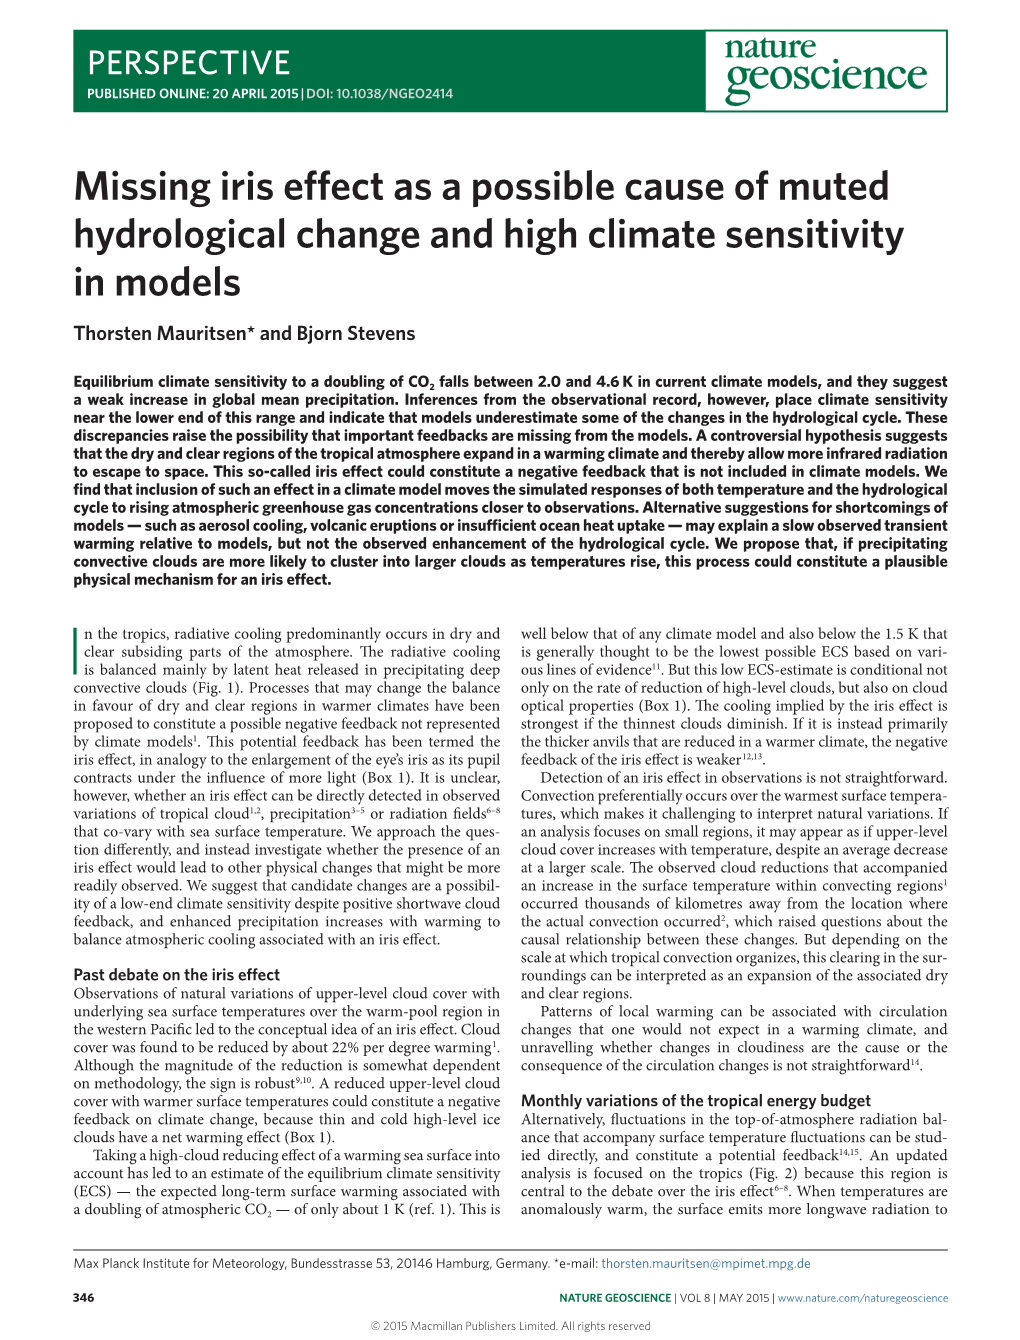 Missing Iris Effect As a Possible Cause of Muted Hydrological Change and High Climate Sensitivity in Models Thorsten Mauritsen* and Bjorn Stevens